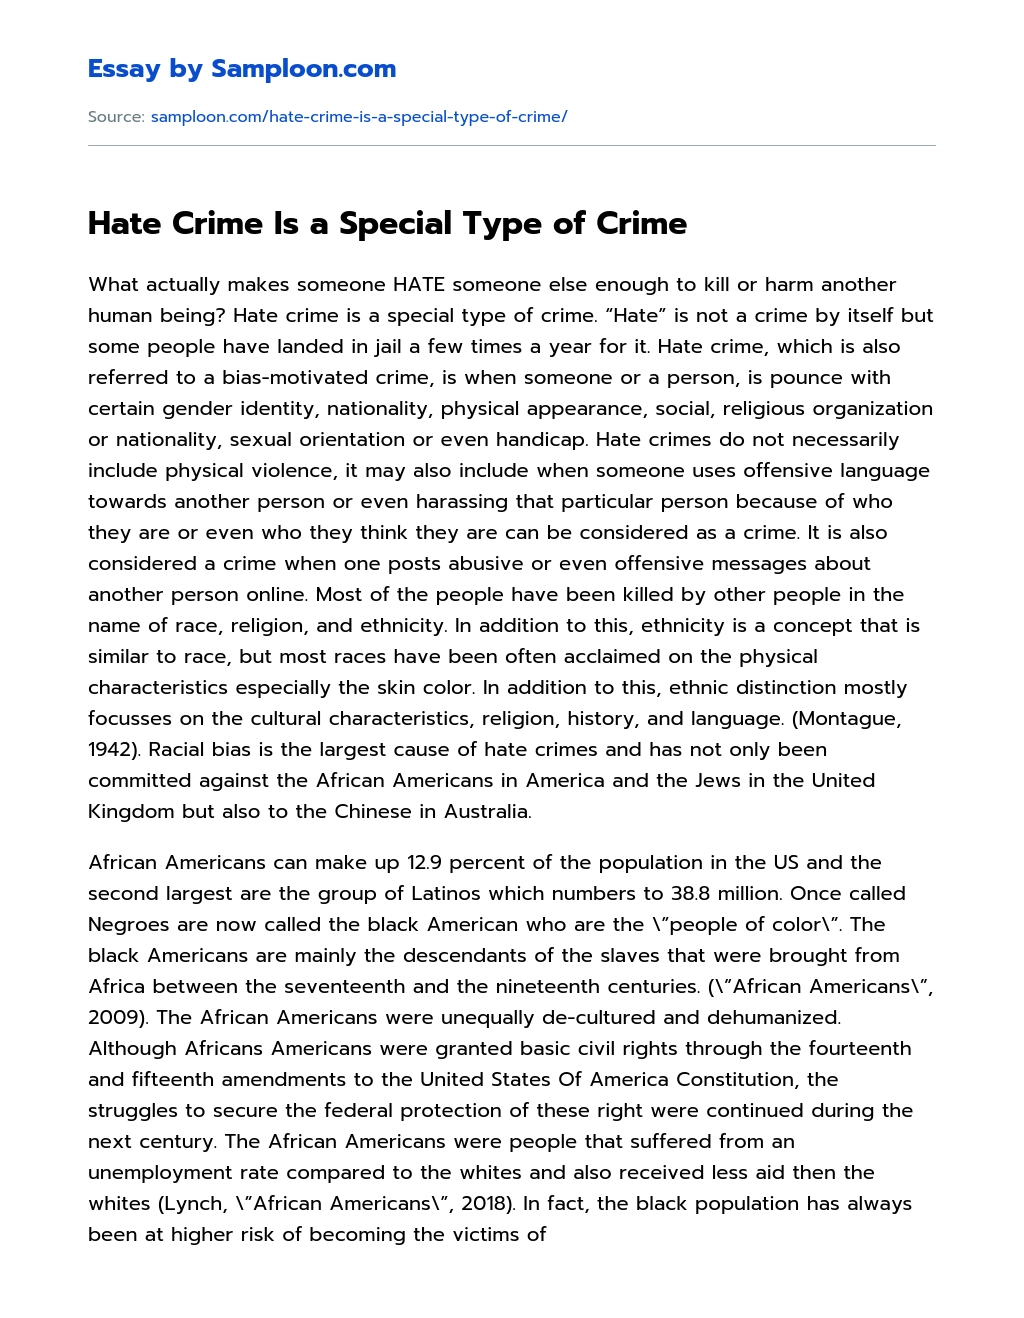 Hate Crime Is a Special Type of Crime essay